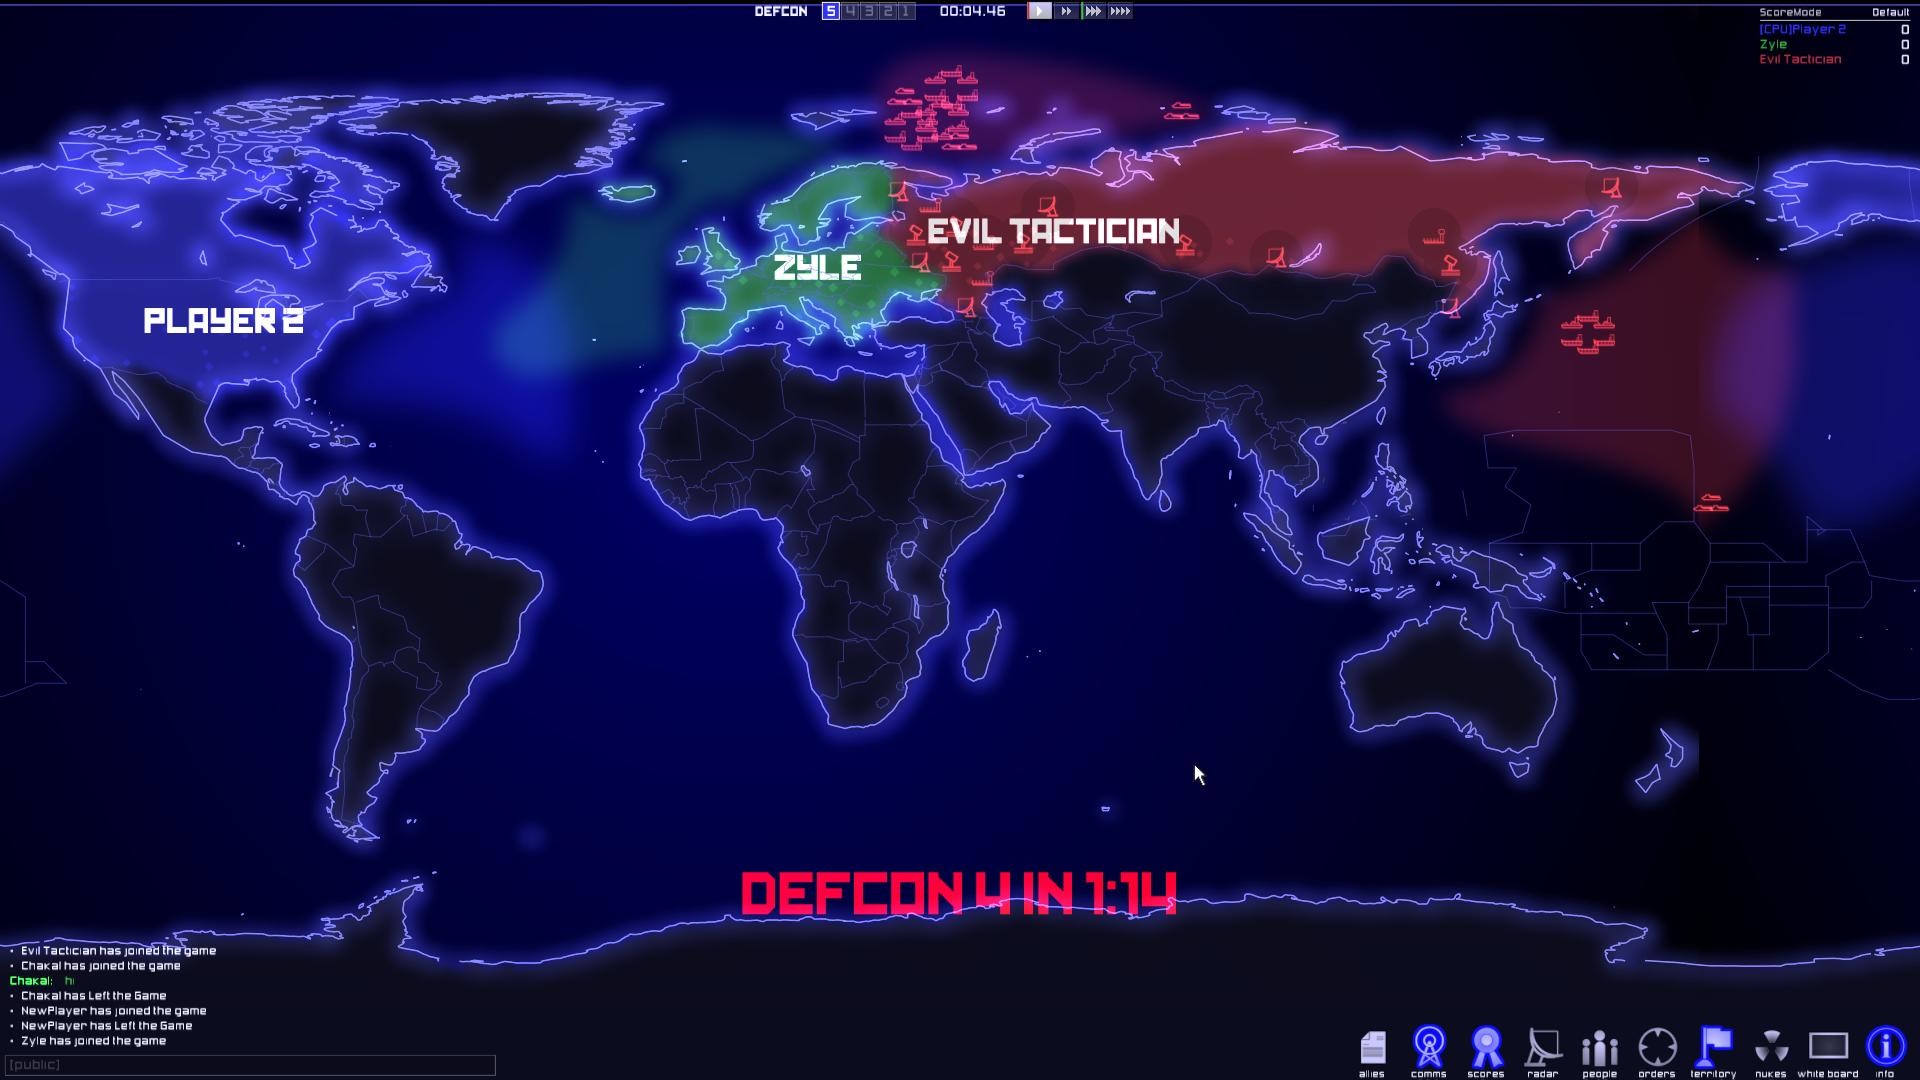 1920x1080 Defcons httpwwwmanapoolcoukdefcon review 